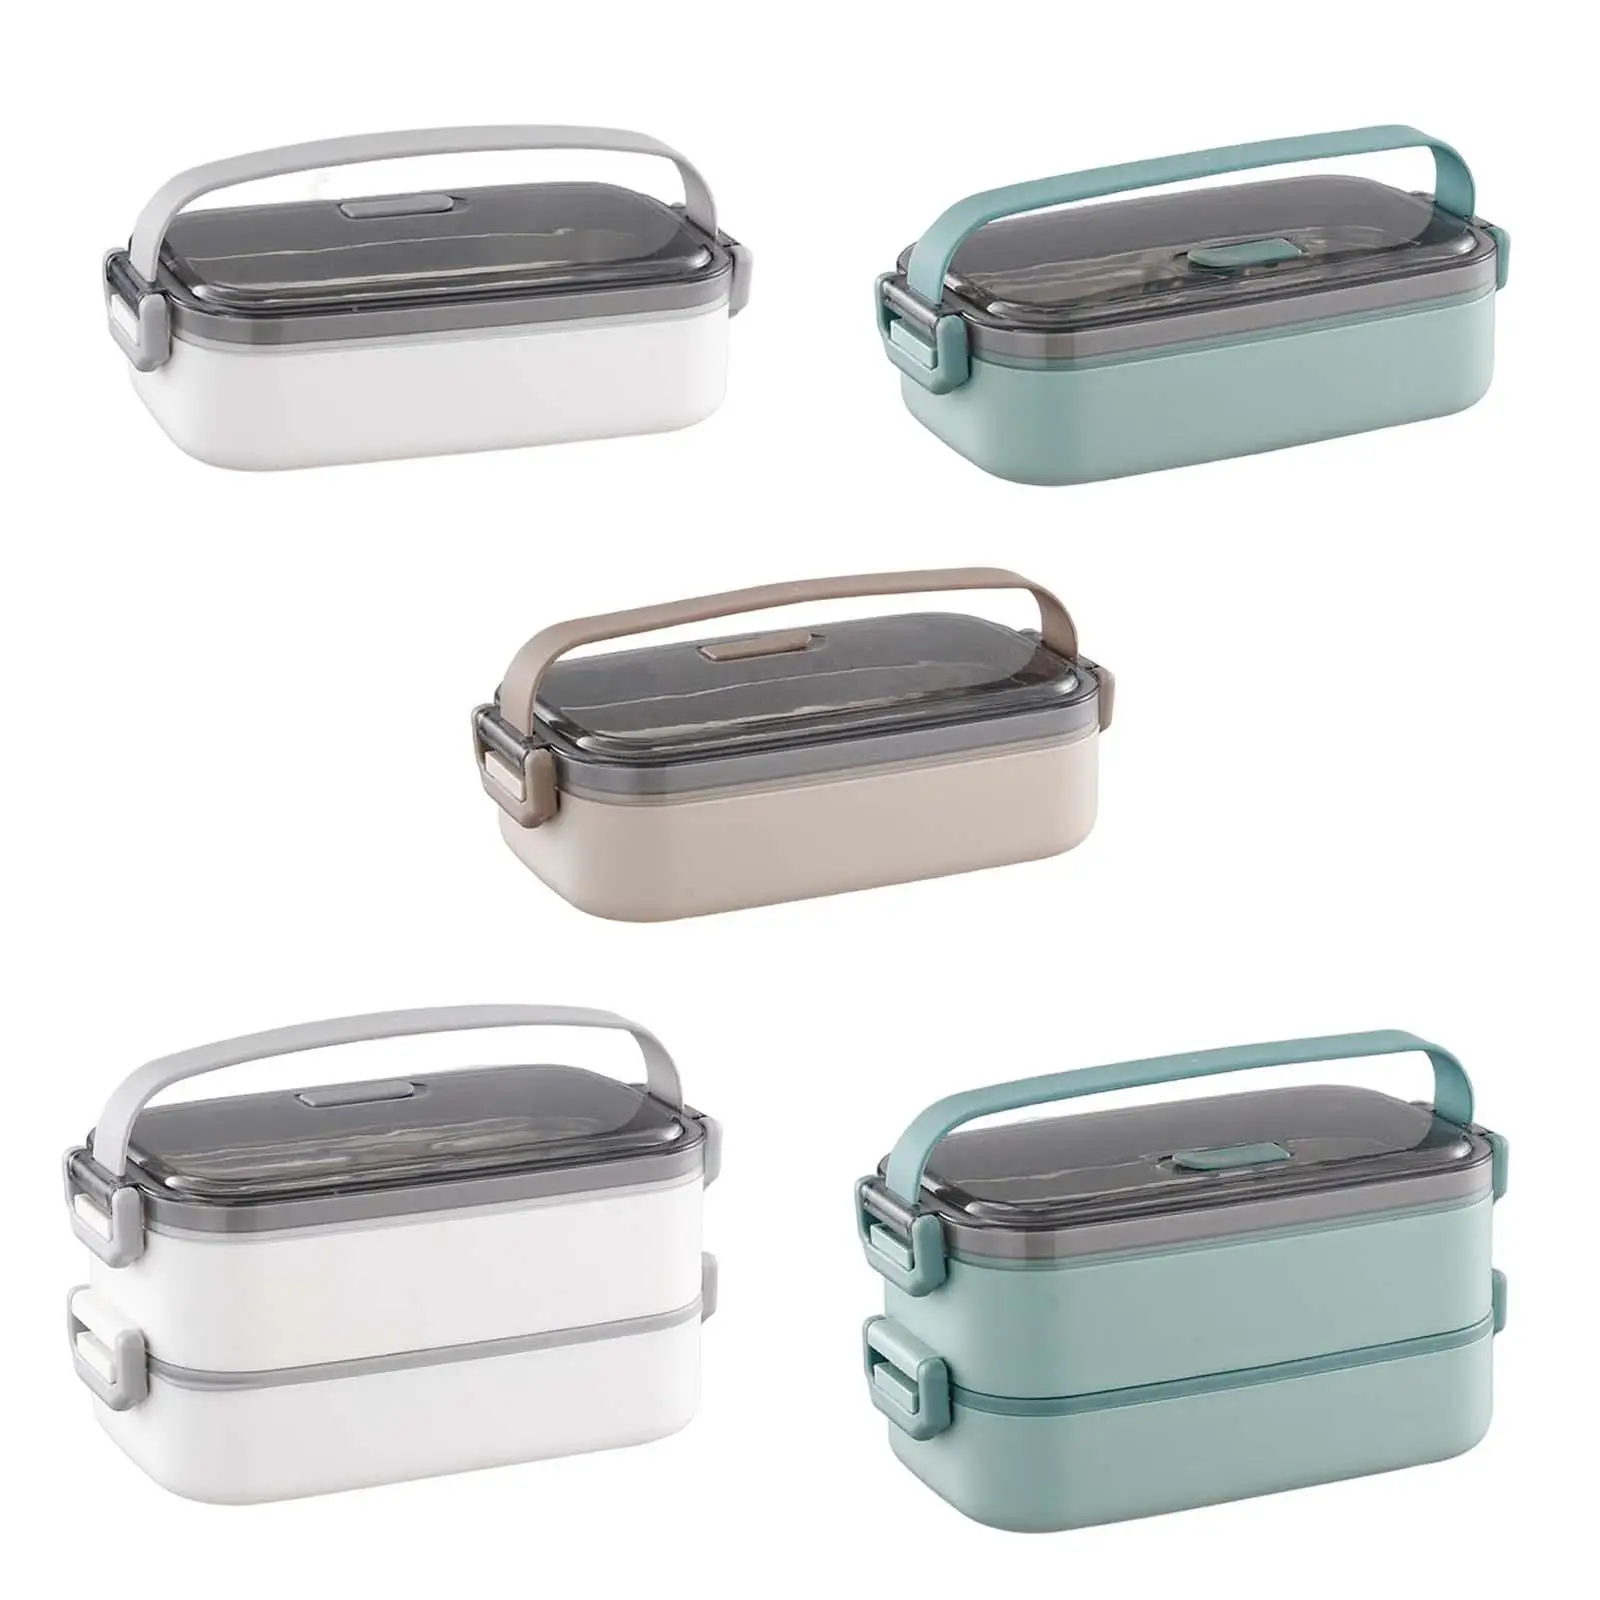 Japanese Style Lunch Box with Handle Large Capacity Bento Box Multifunctional Leakproof for Home Office Hiking Camping Travel